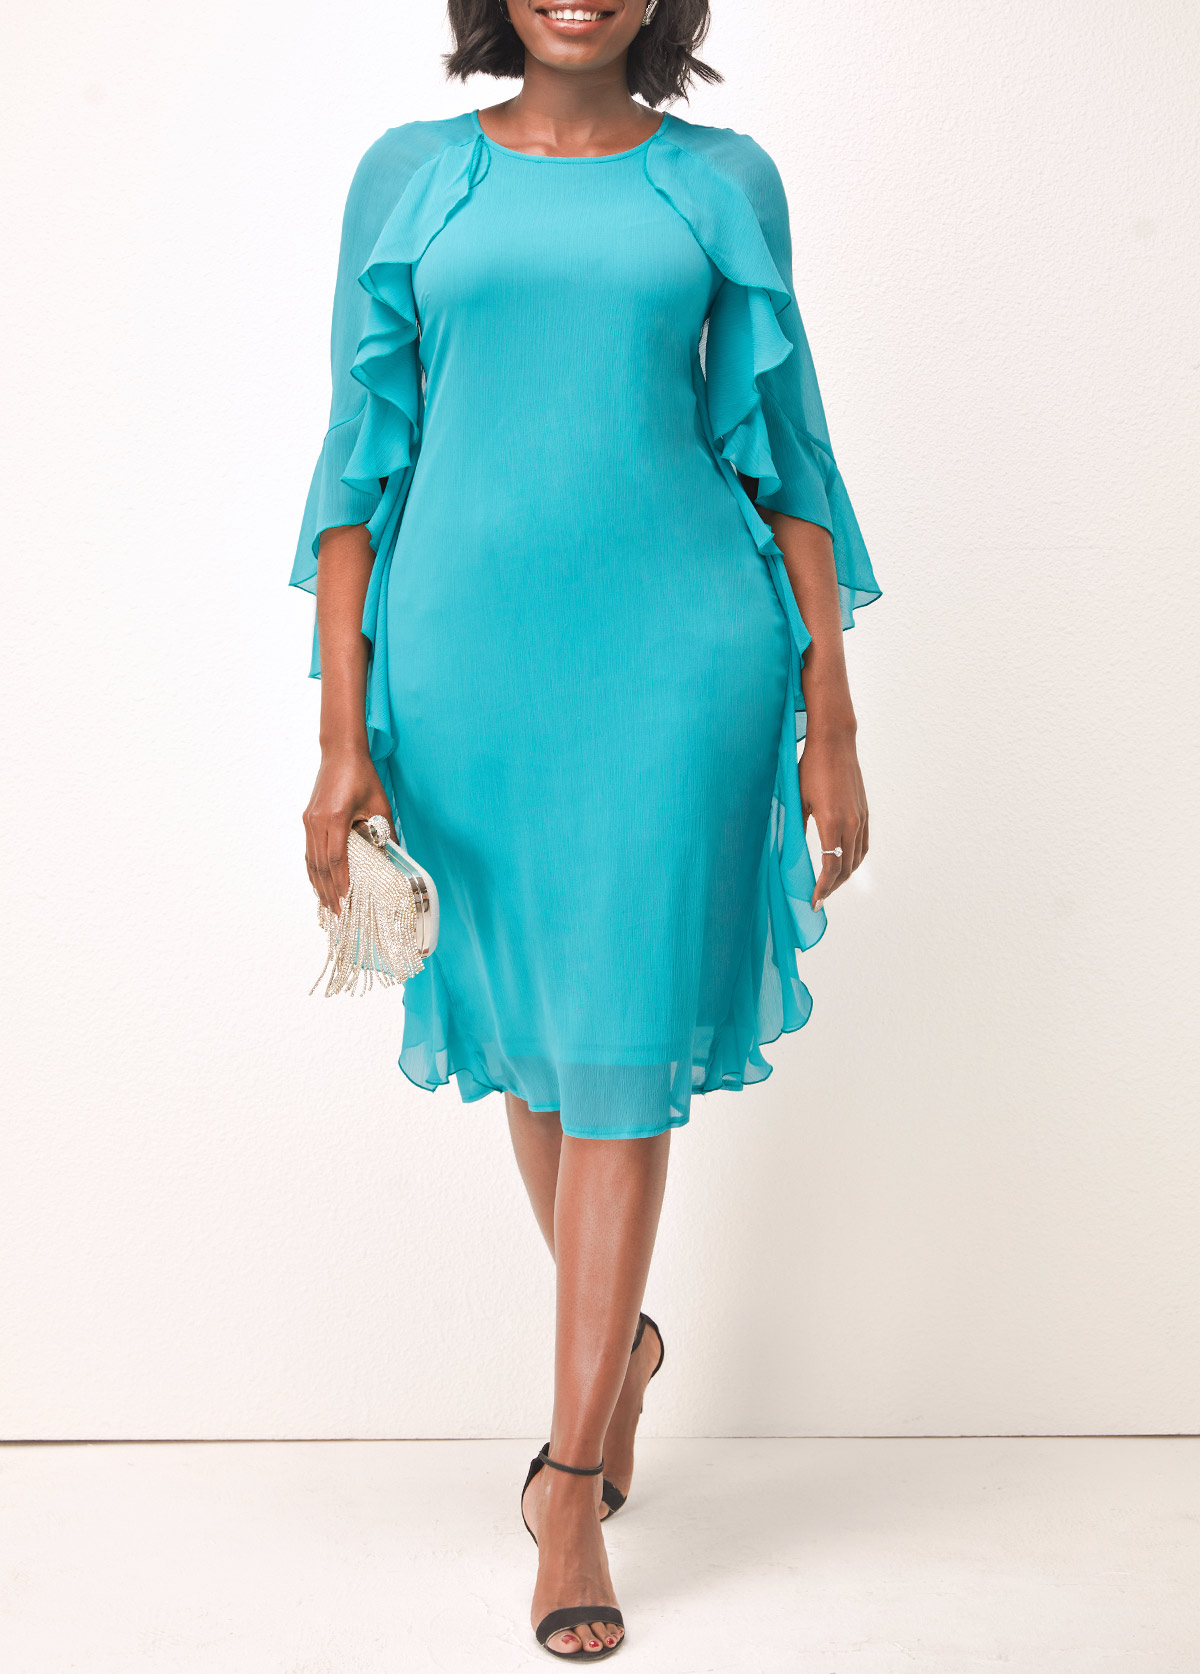 Ruffle Sleeve Faux Two Piece Turquoise Dress